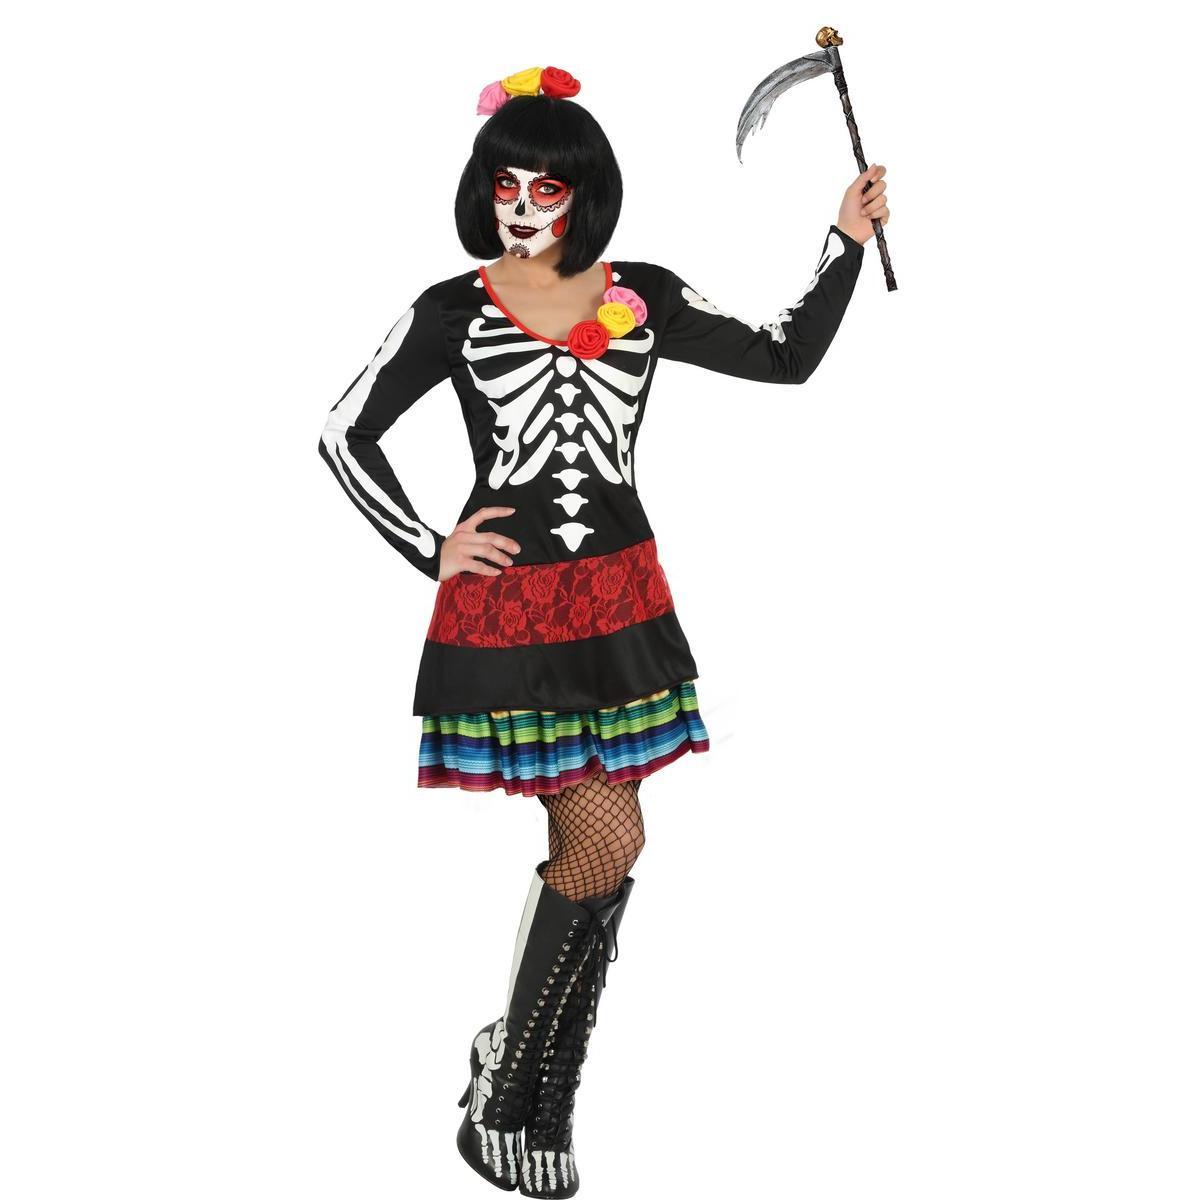 Déguisement Day of the Dead - 100 % Polyester - Taille adulte - Multicolore